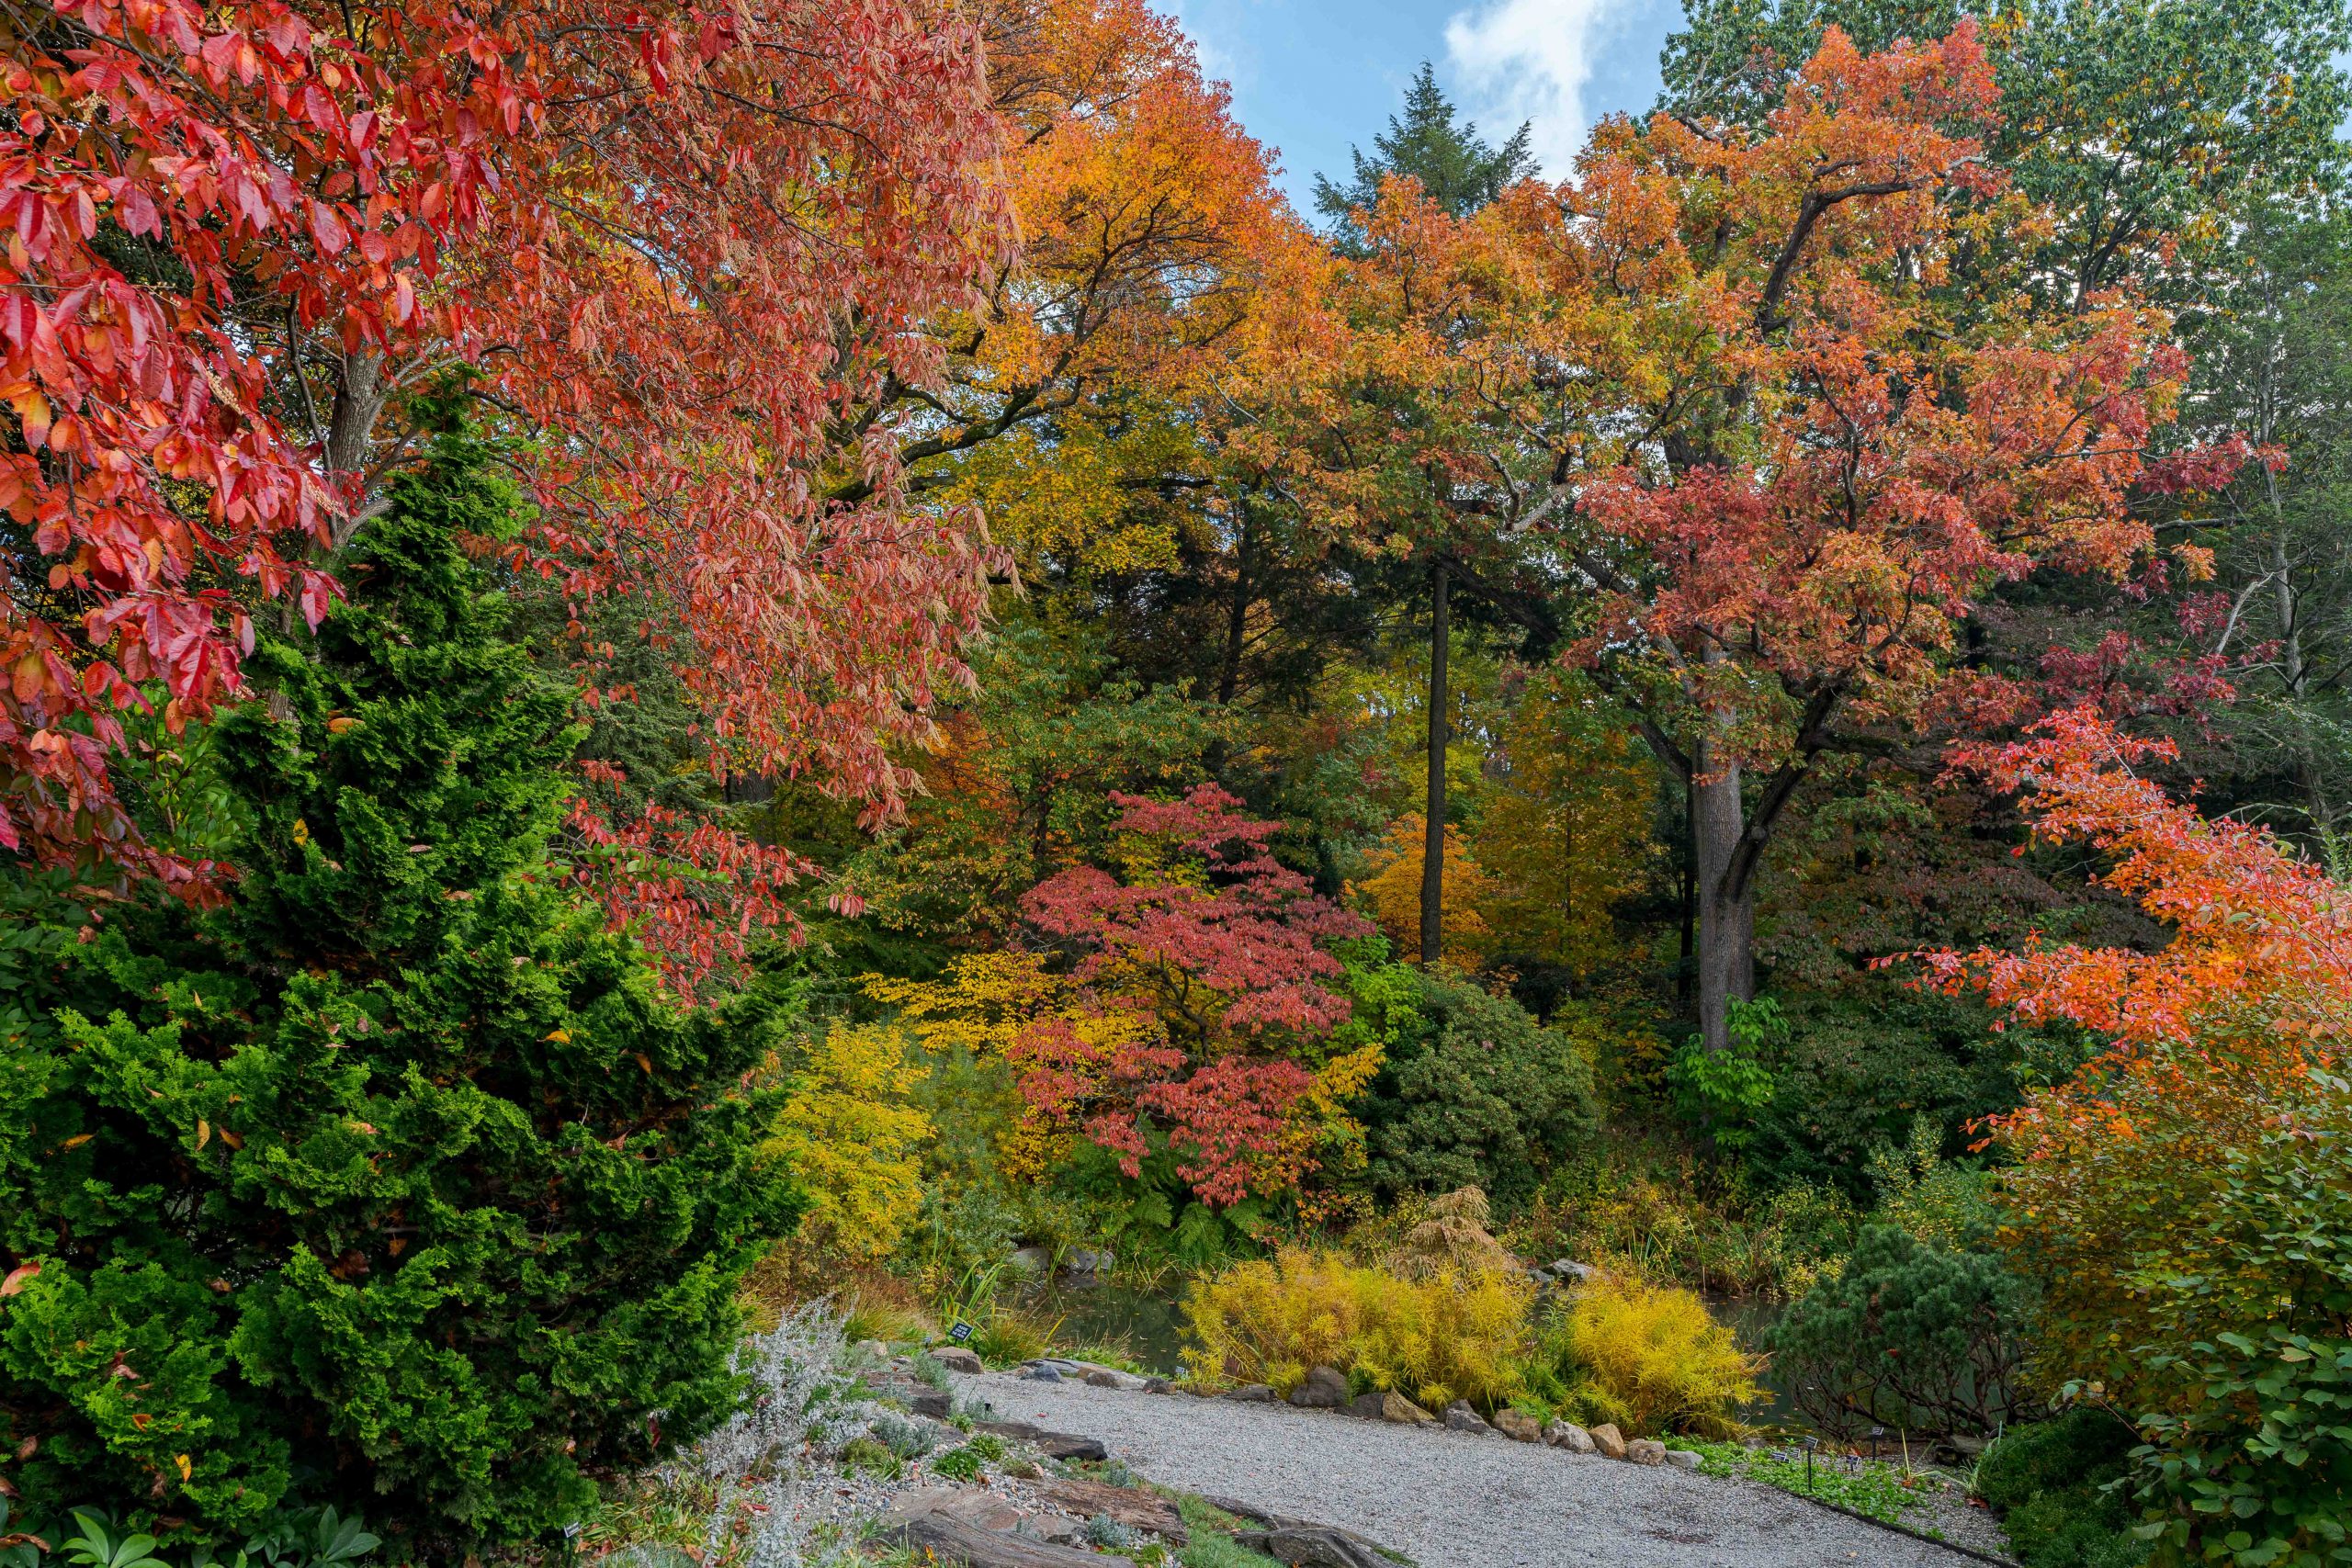 A paved path leads into a fall forest of greens and reds